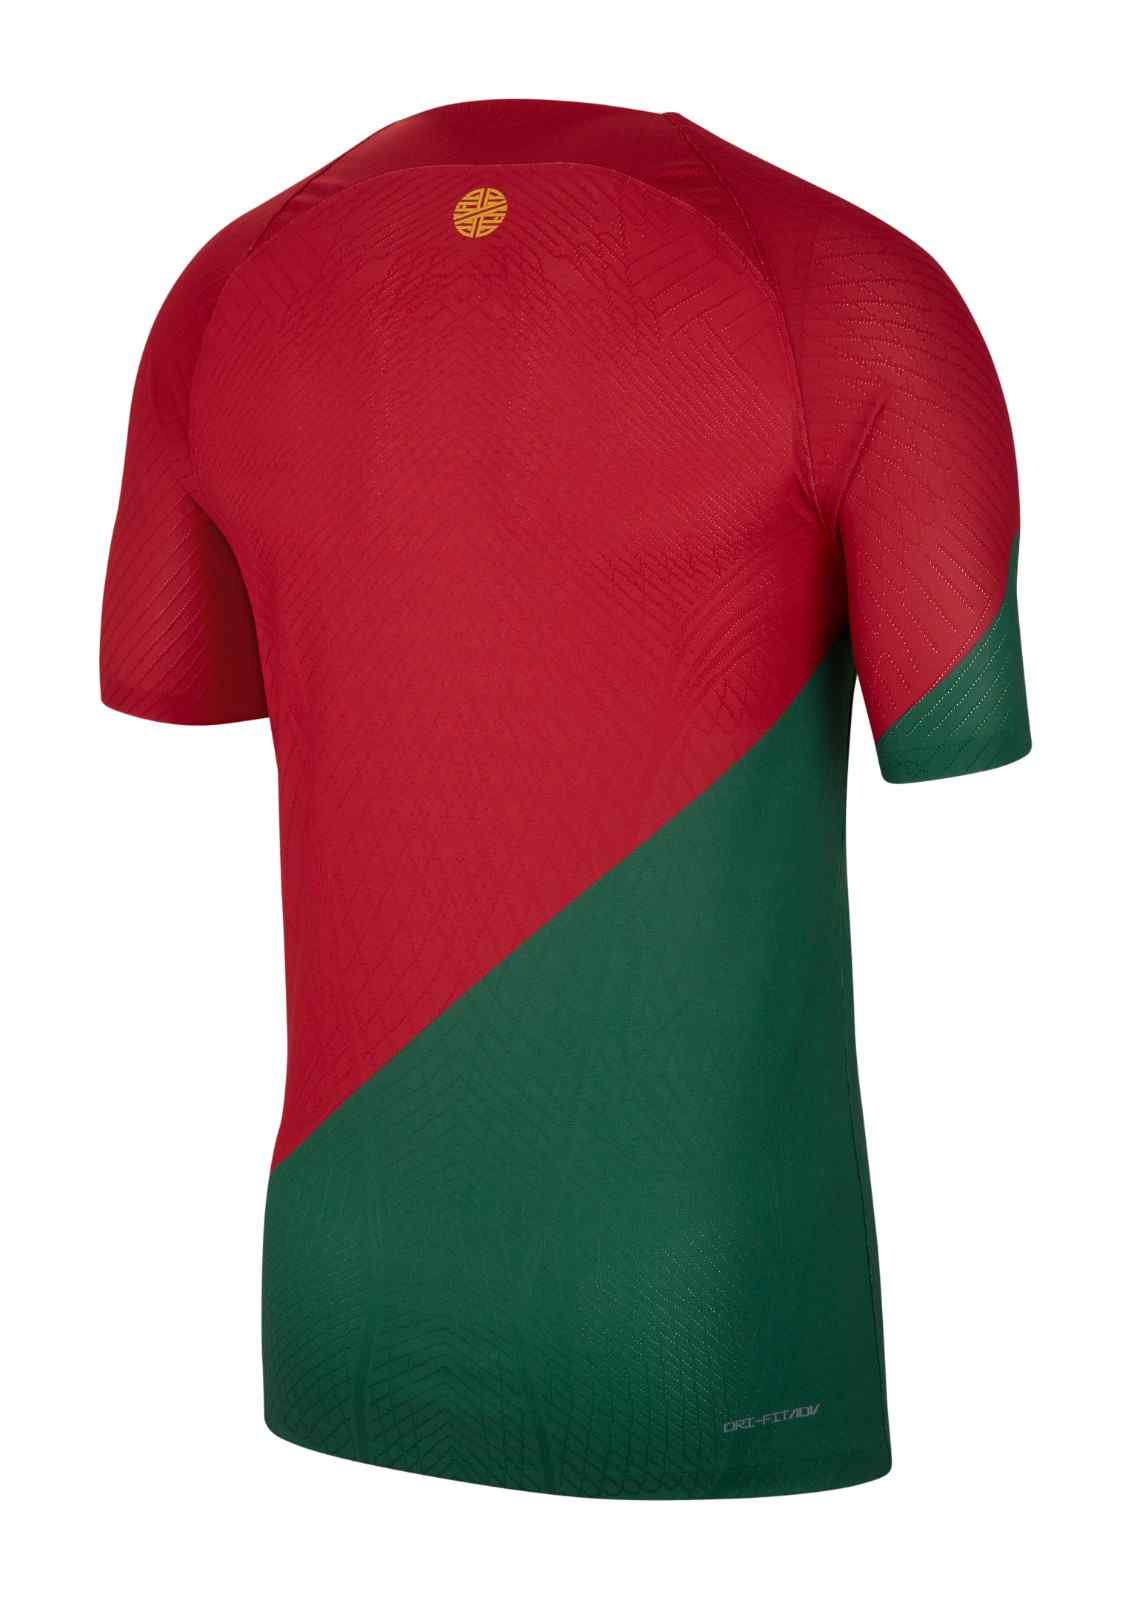 Nike-Portugal-2022-FIFA-World-Cup-Home-Kit-released